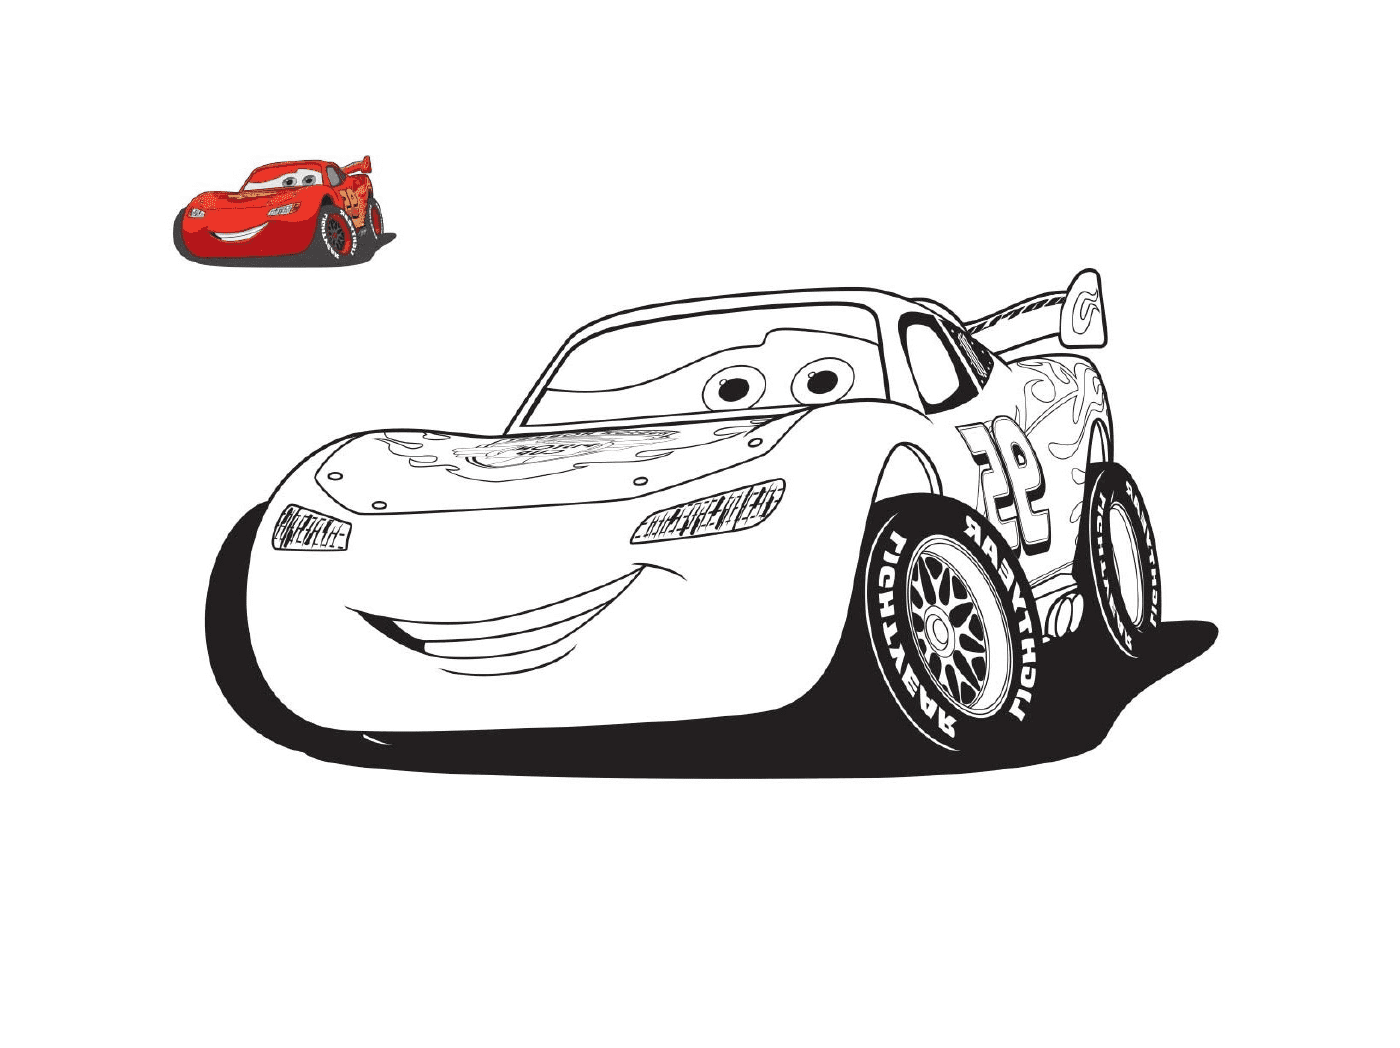  Cars 3, the adventure continues 